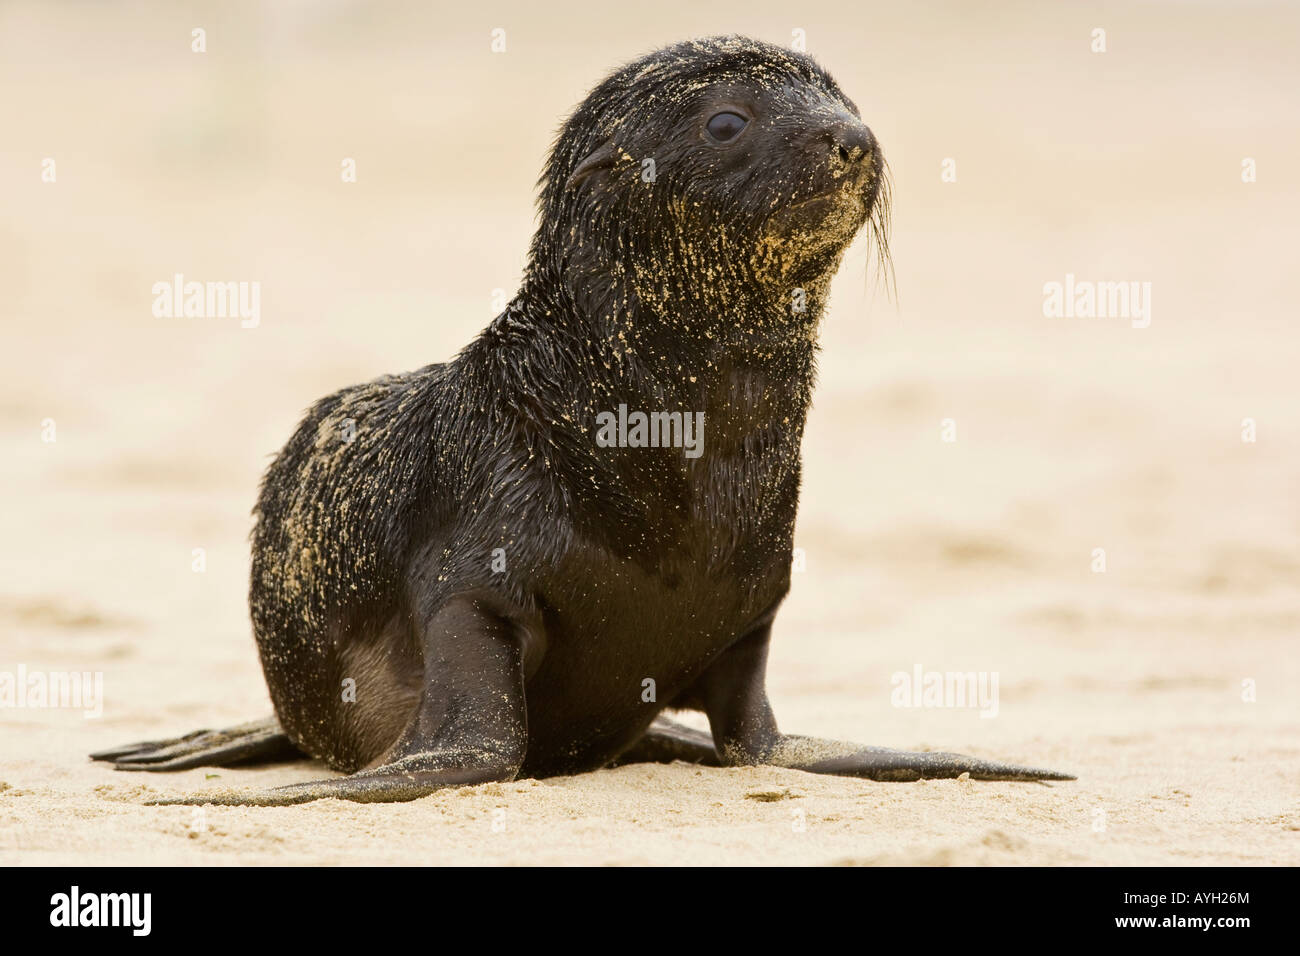 Baby South African Fur Seal on sand, Namibia, Africa Stock Photo